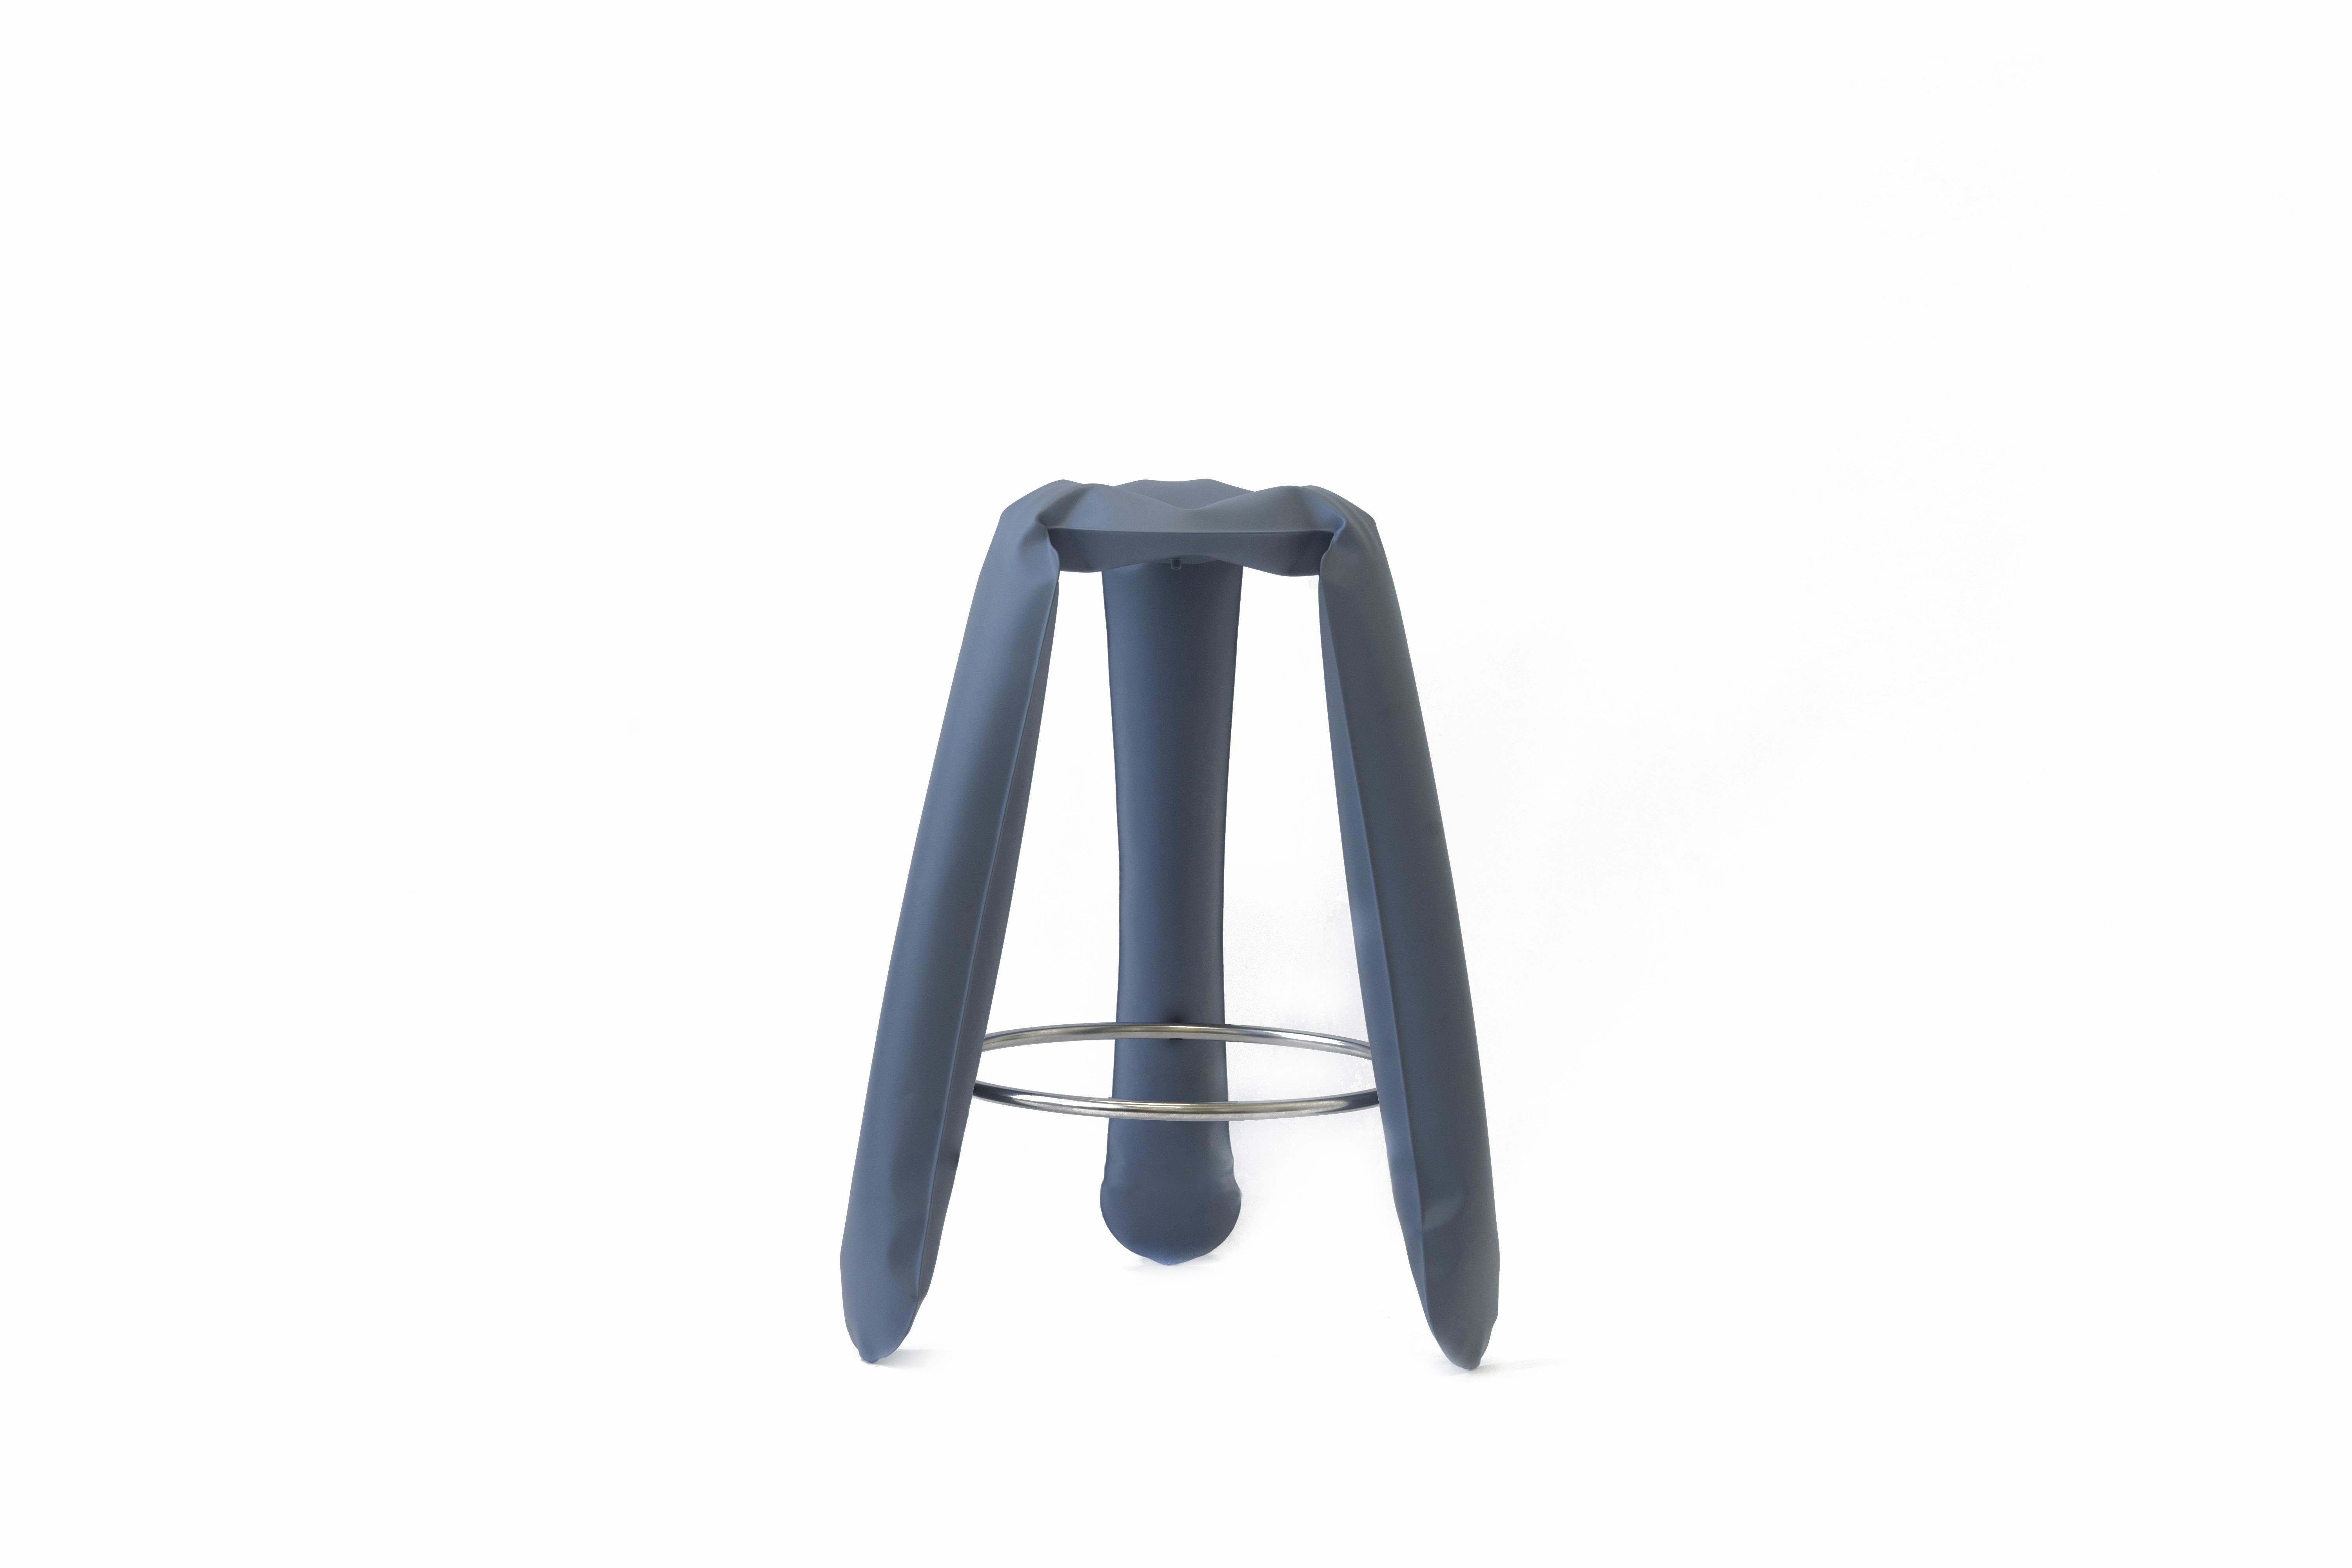 Blue gray steel bar Plopp stool by Zieta
Dimensions: D 35 x H 75 cm 
Material: Carbon steel. 
Finish: Powder-Coated.
Available in colors: Beige, black, white, blue, graphite, moss, umbra gray, flaming gold, and cosmic blue. Available in Stainless